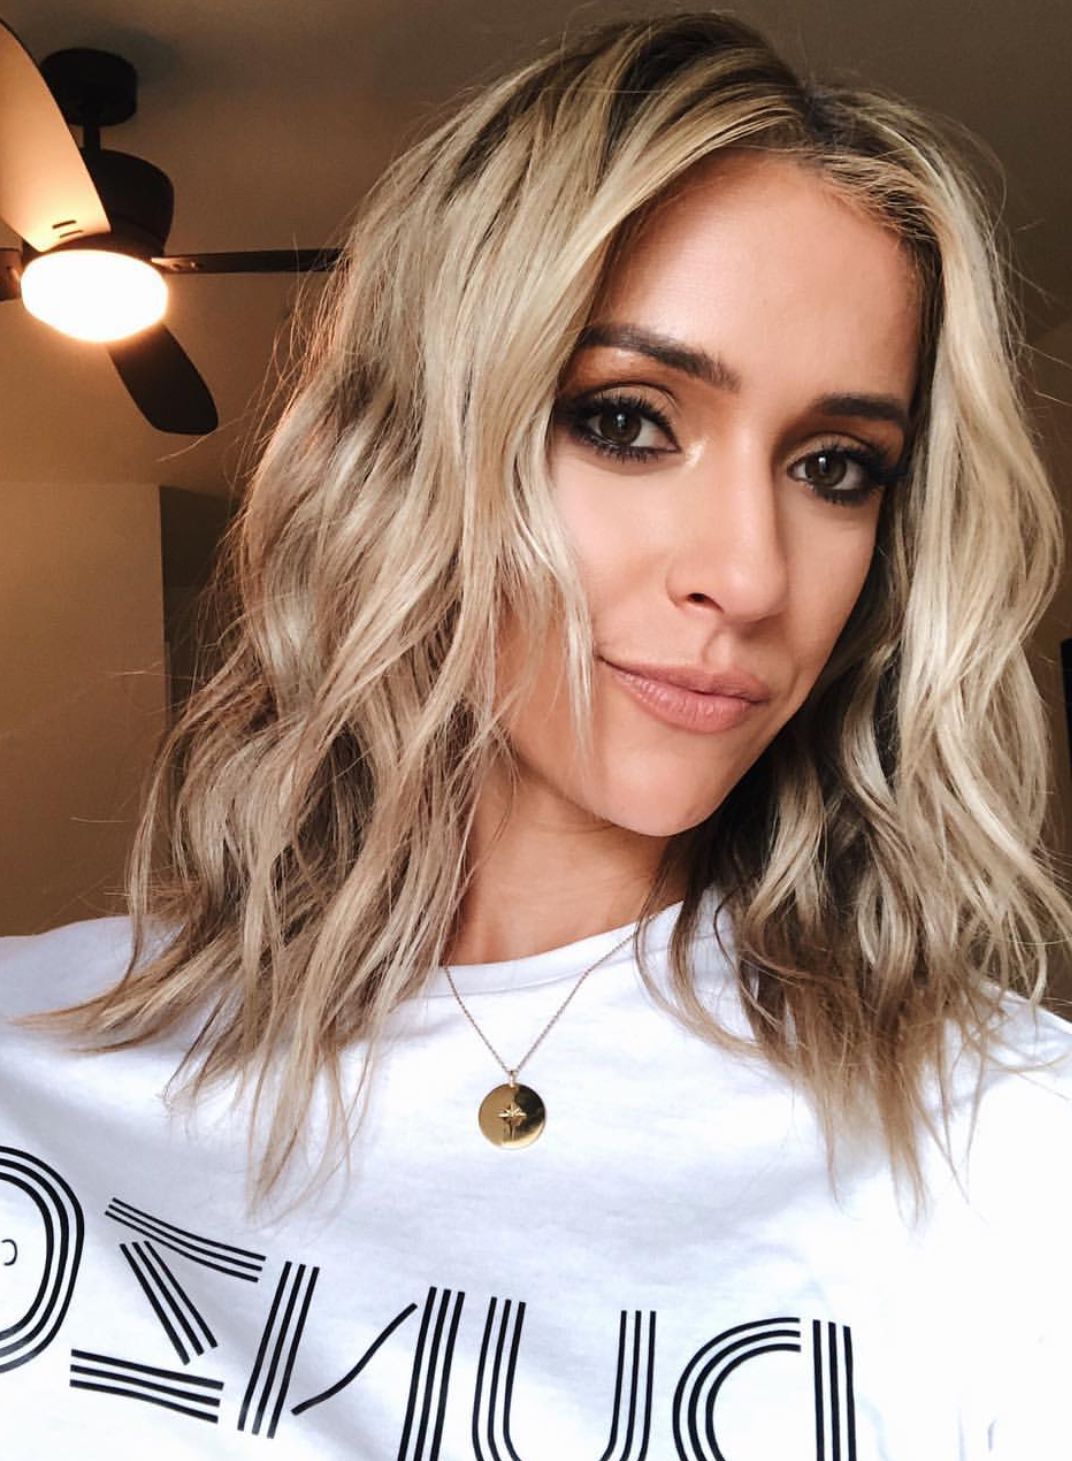 Kristin Cavallari From The Hills Short Hair With Beachy Waves Hair Intended For Kristin Cavallari Short Hairstyles (View 9 of 25)